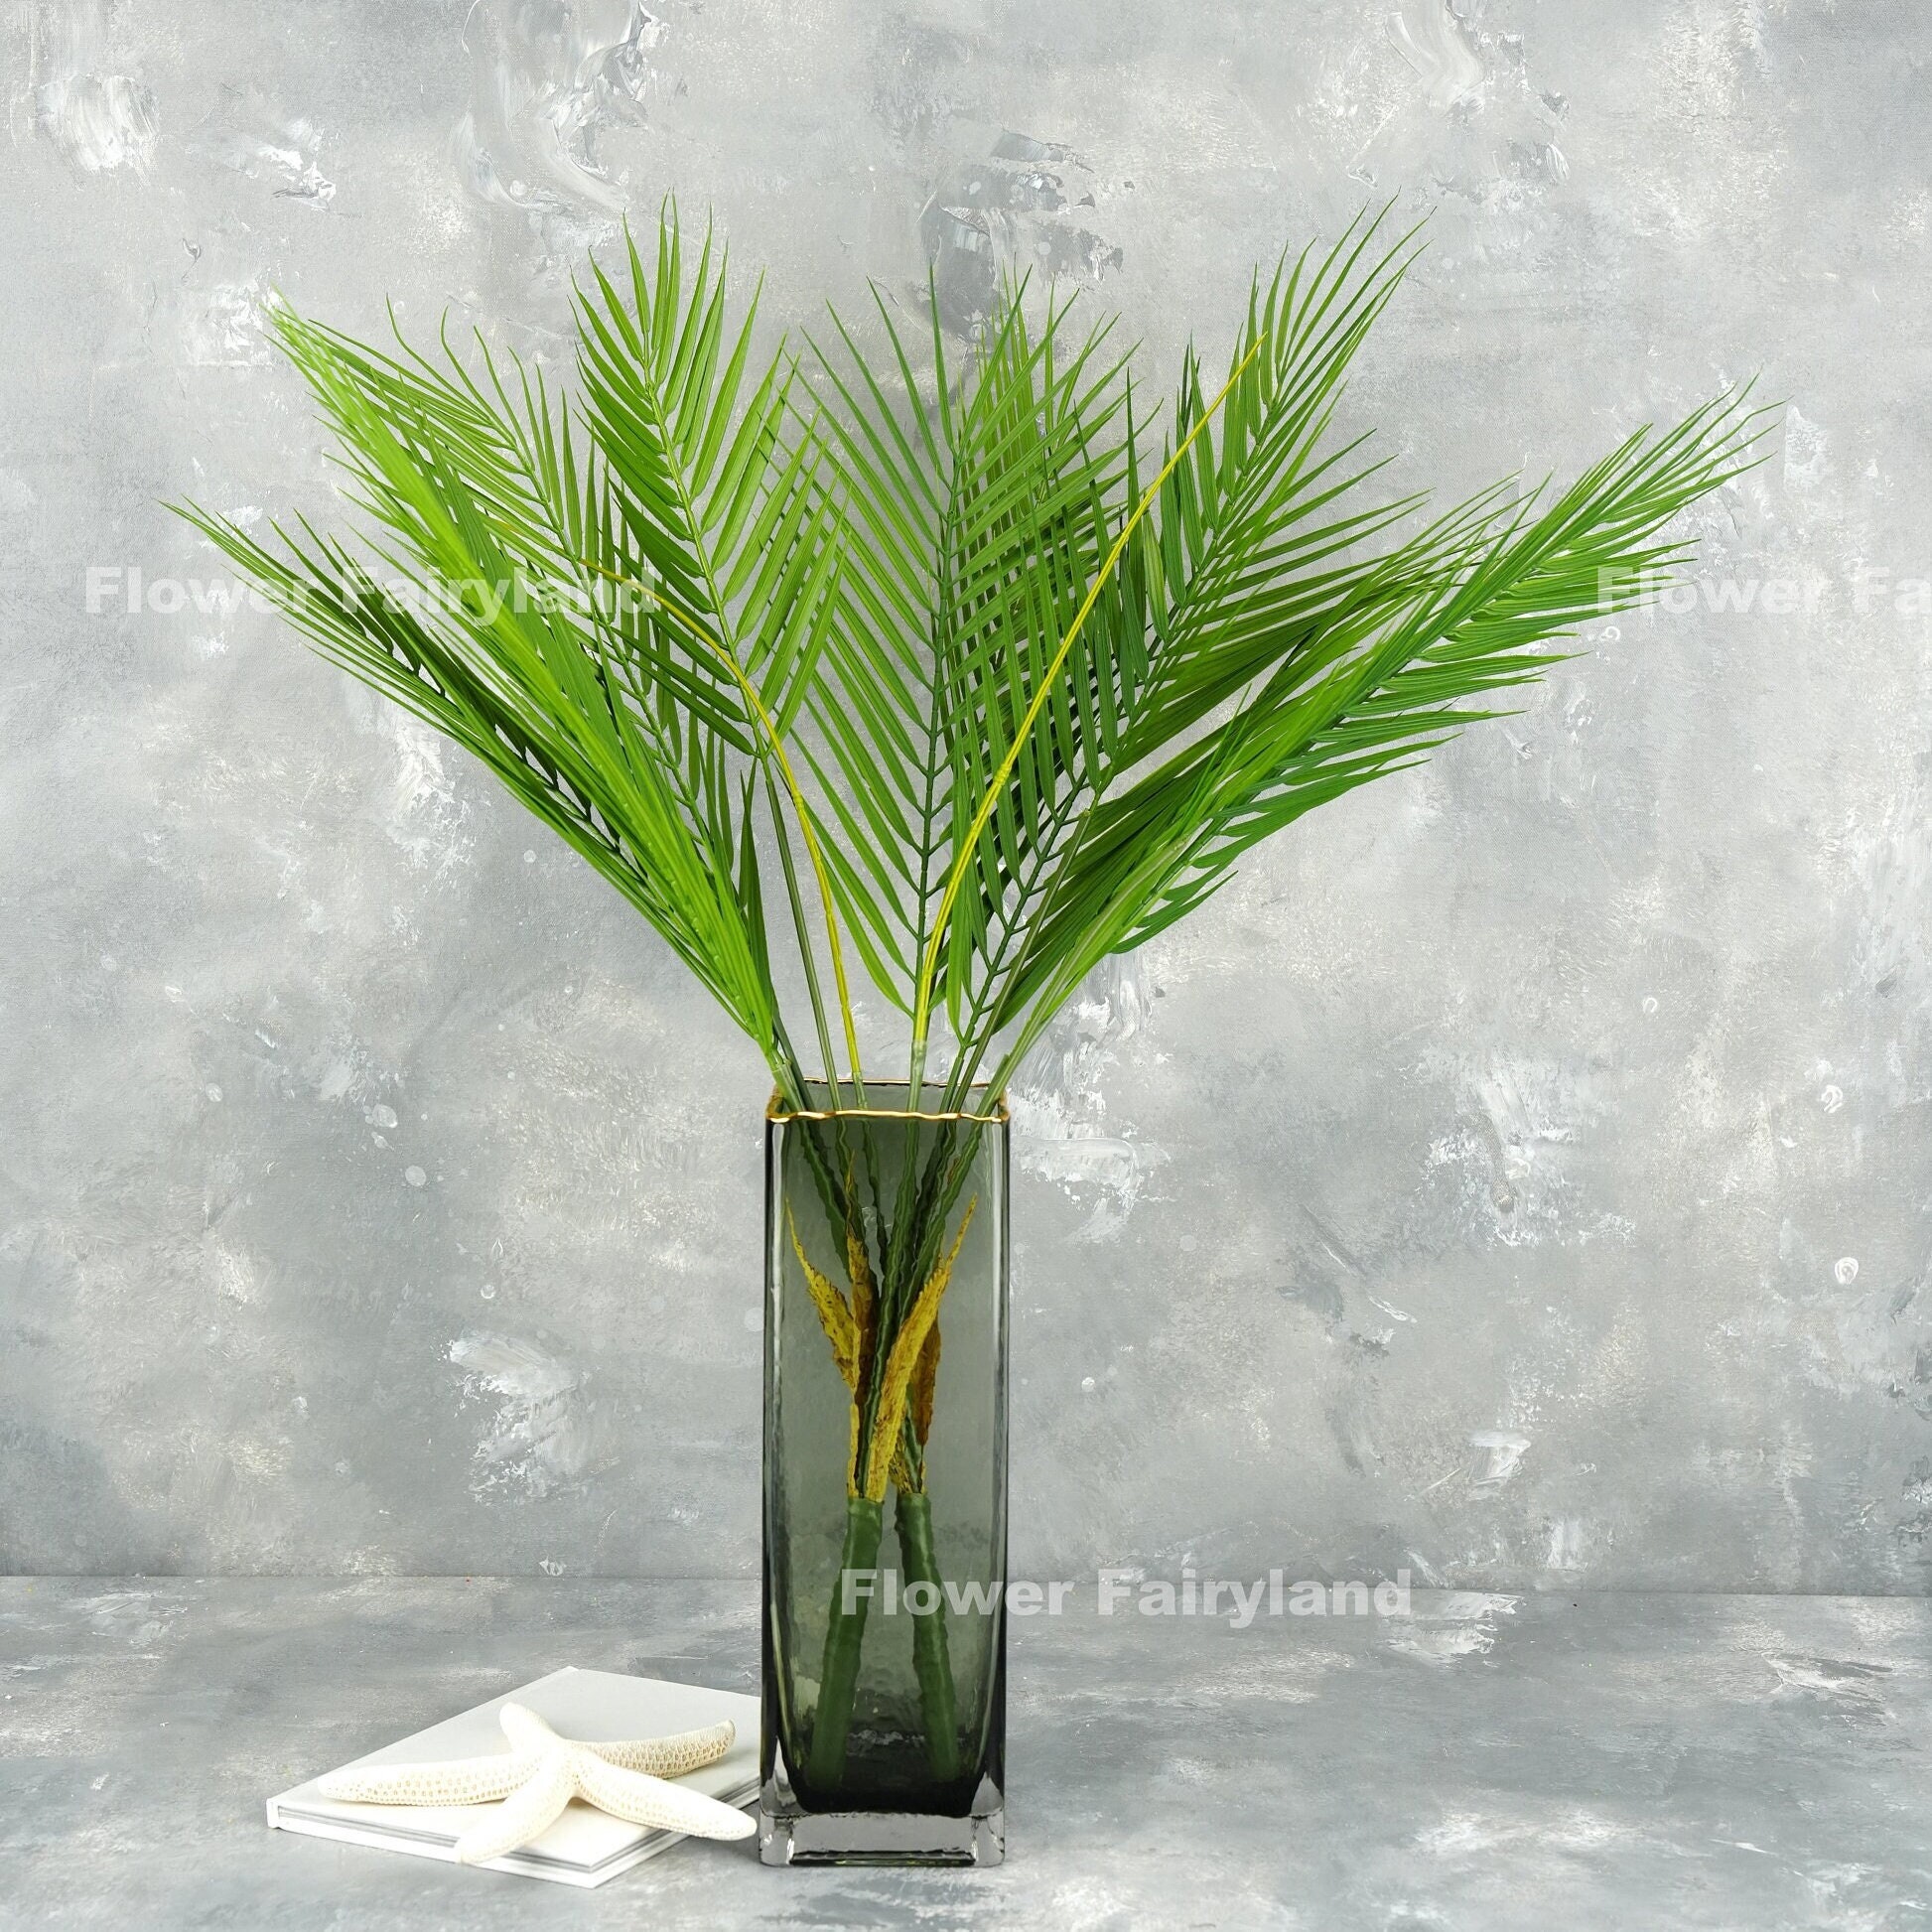 Ruidazon 14Pcs Artificial Palm Leaves, 20.4 Outdoor Faux Palm Fronds Fake  Tropical Palm Leaves for …See more Ruidazon 14Pcs Artificial Palm Leaves